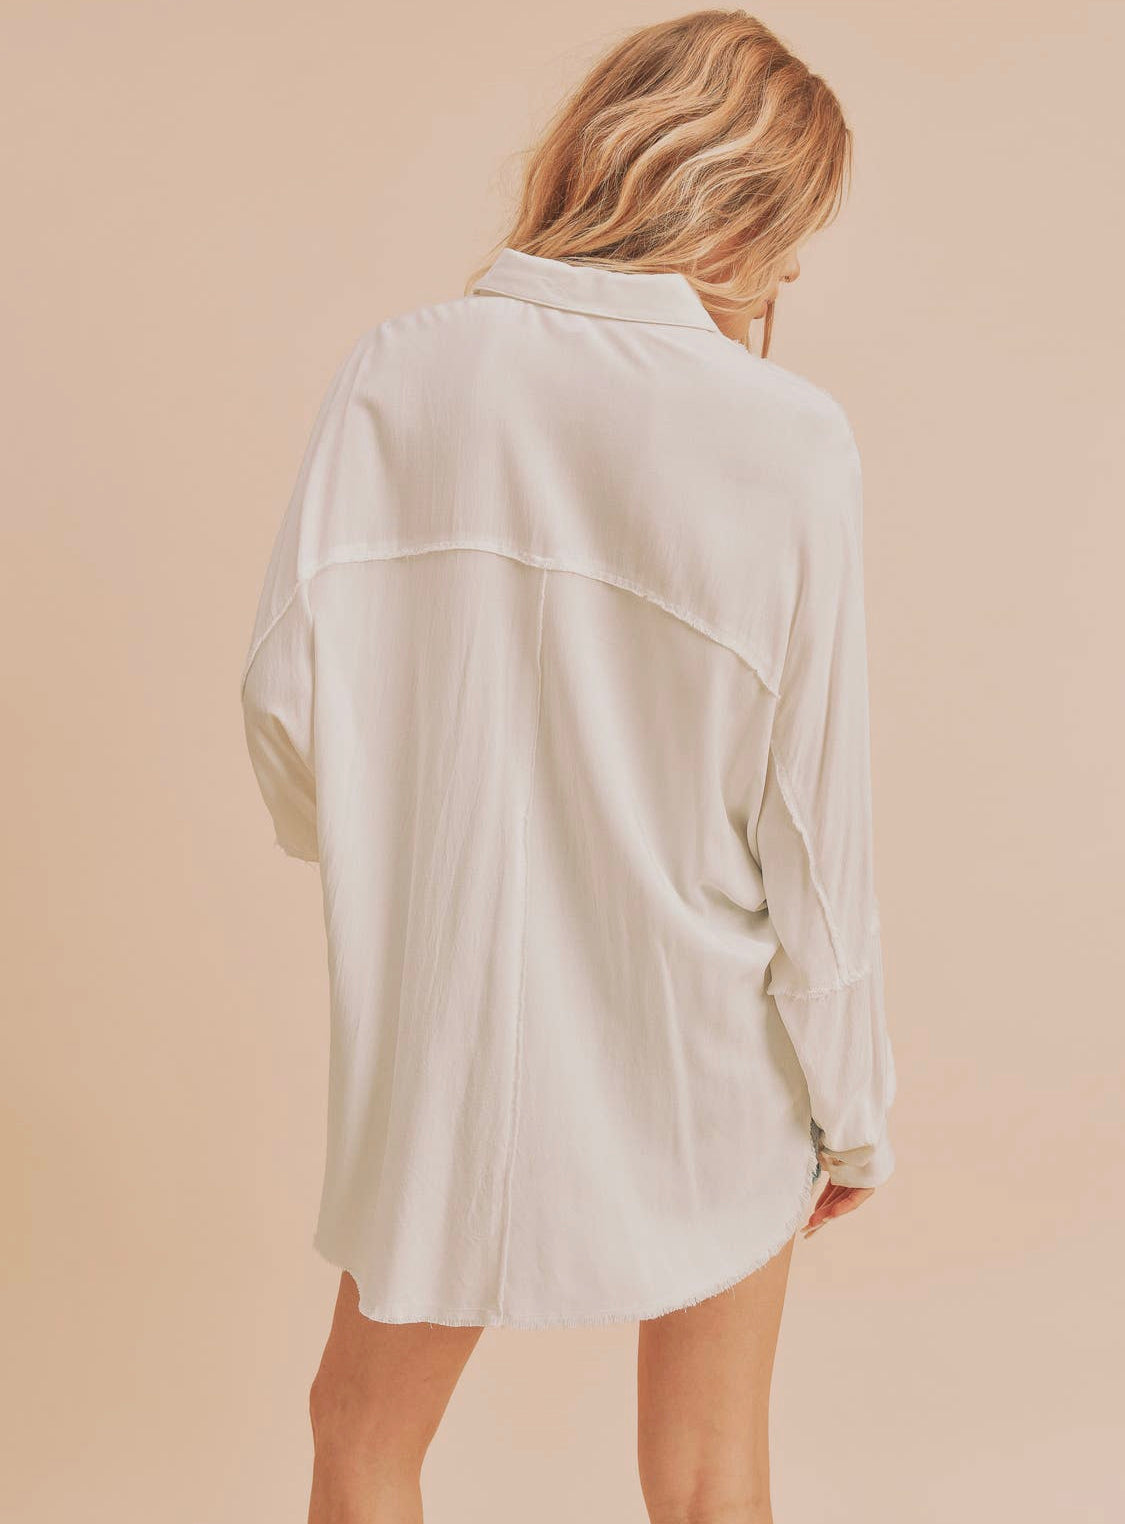 Oversized Raw Hem White Buttonup Collared Long Sleeve Blouse